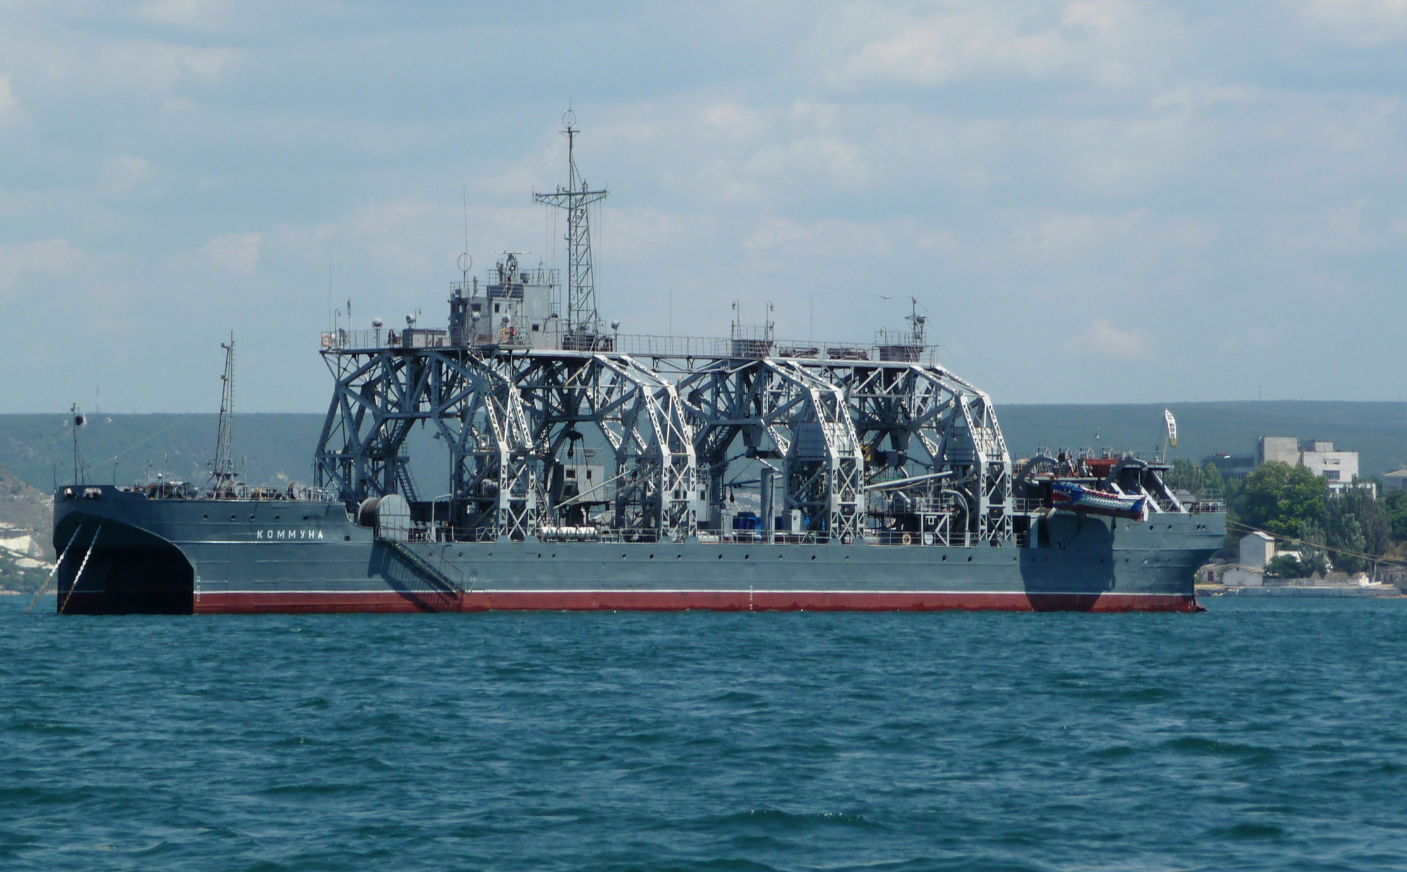 Ukrainian Armed Forces hit 100-year-old Russian ship Kommuna in Sevastopol: what is known about it